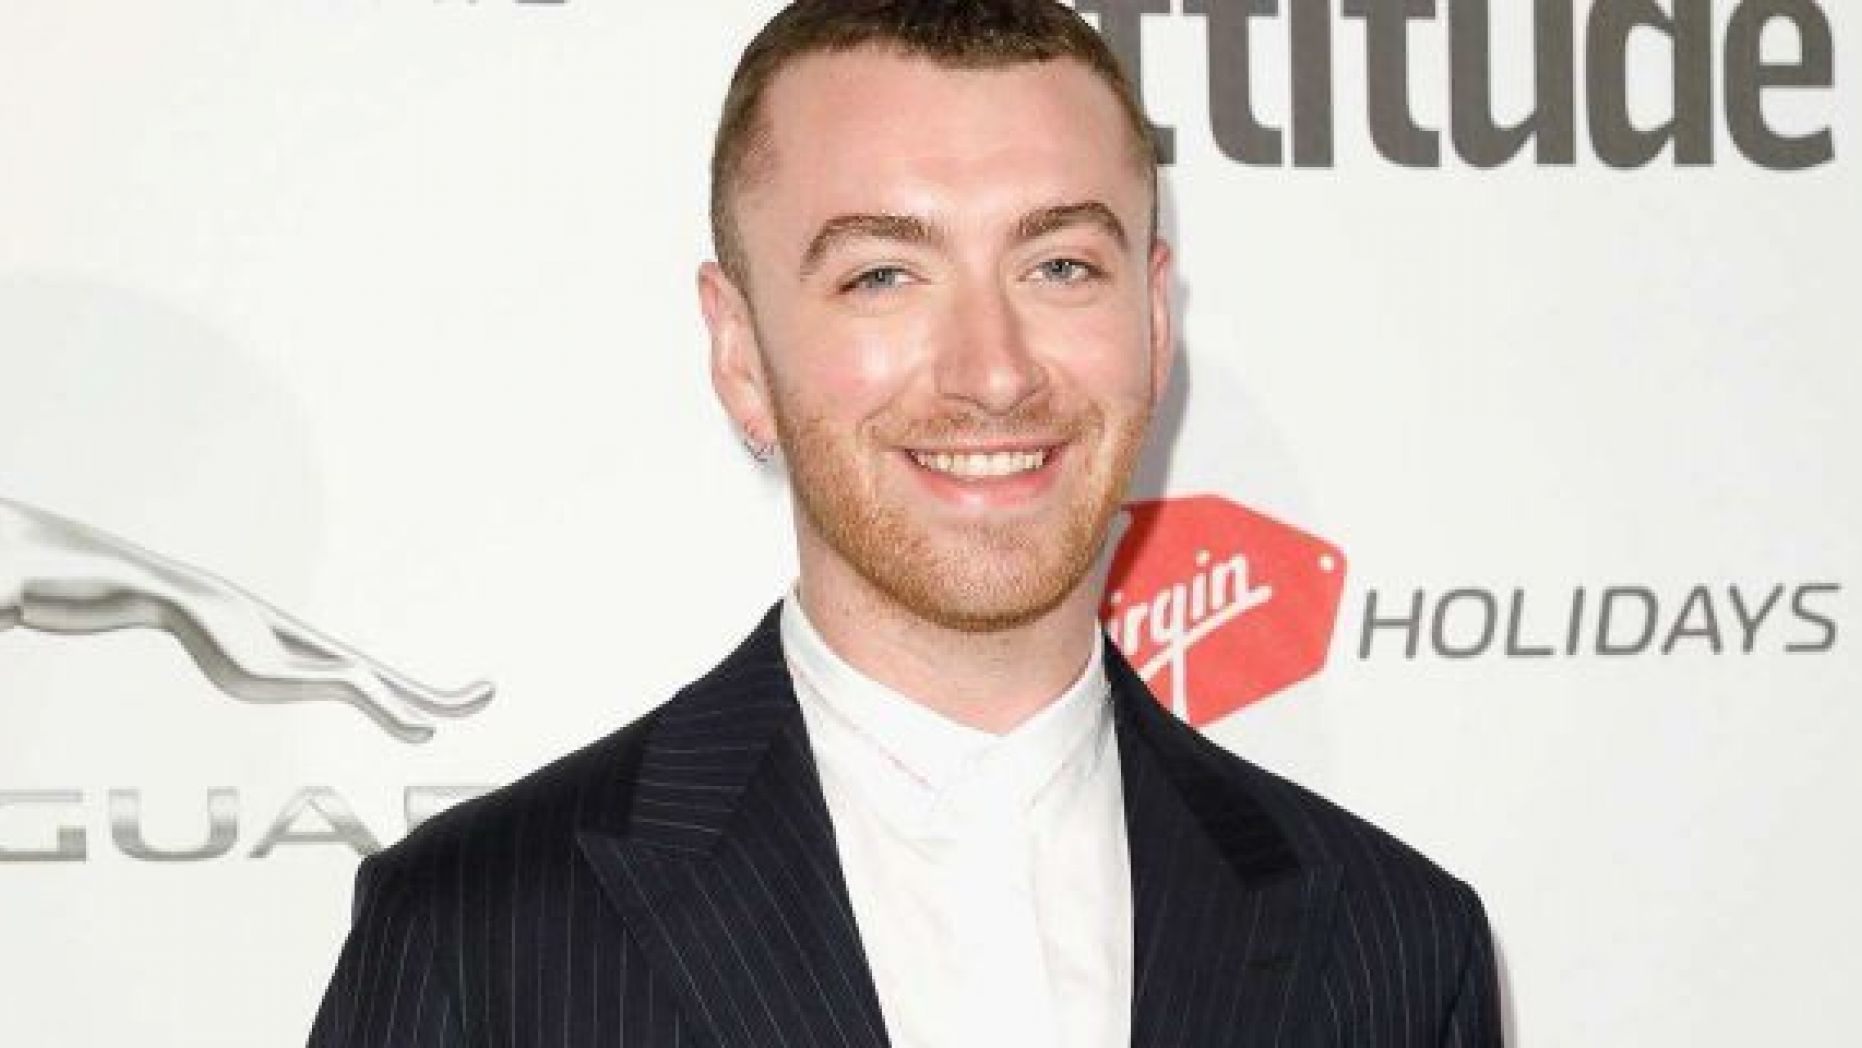 Sam Smith opened up about his past struggles with body image in an Instagram post on Tuesday.